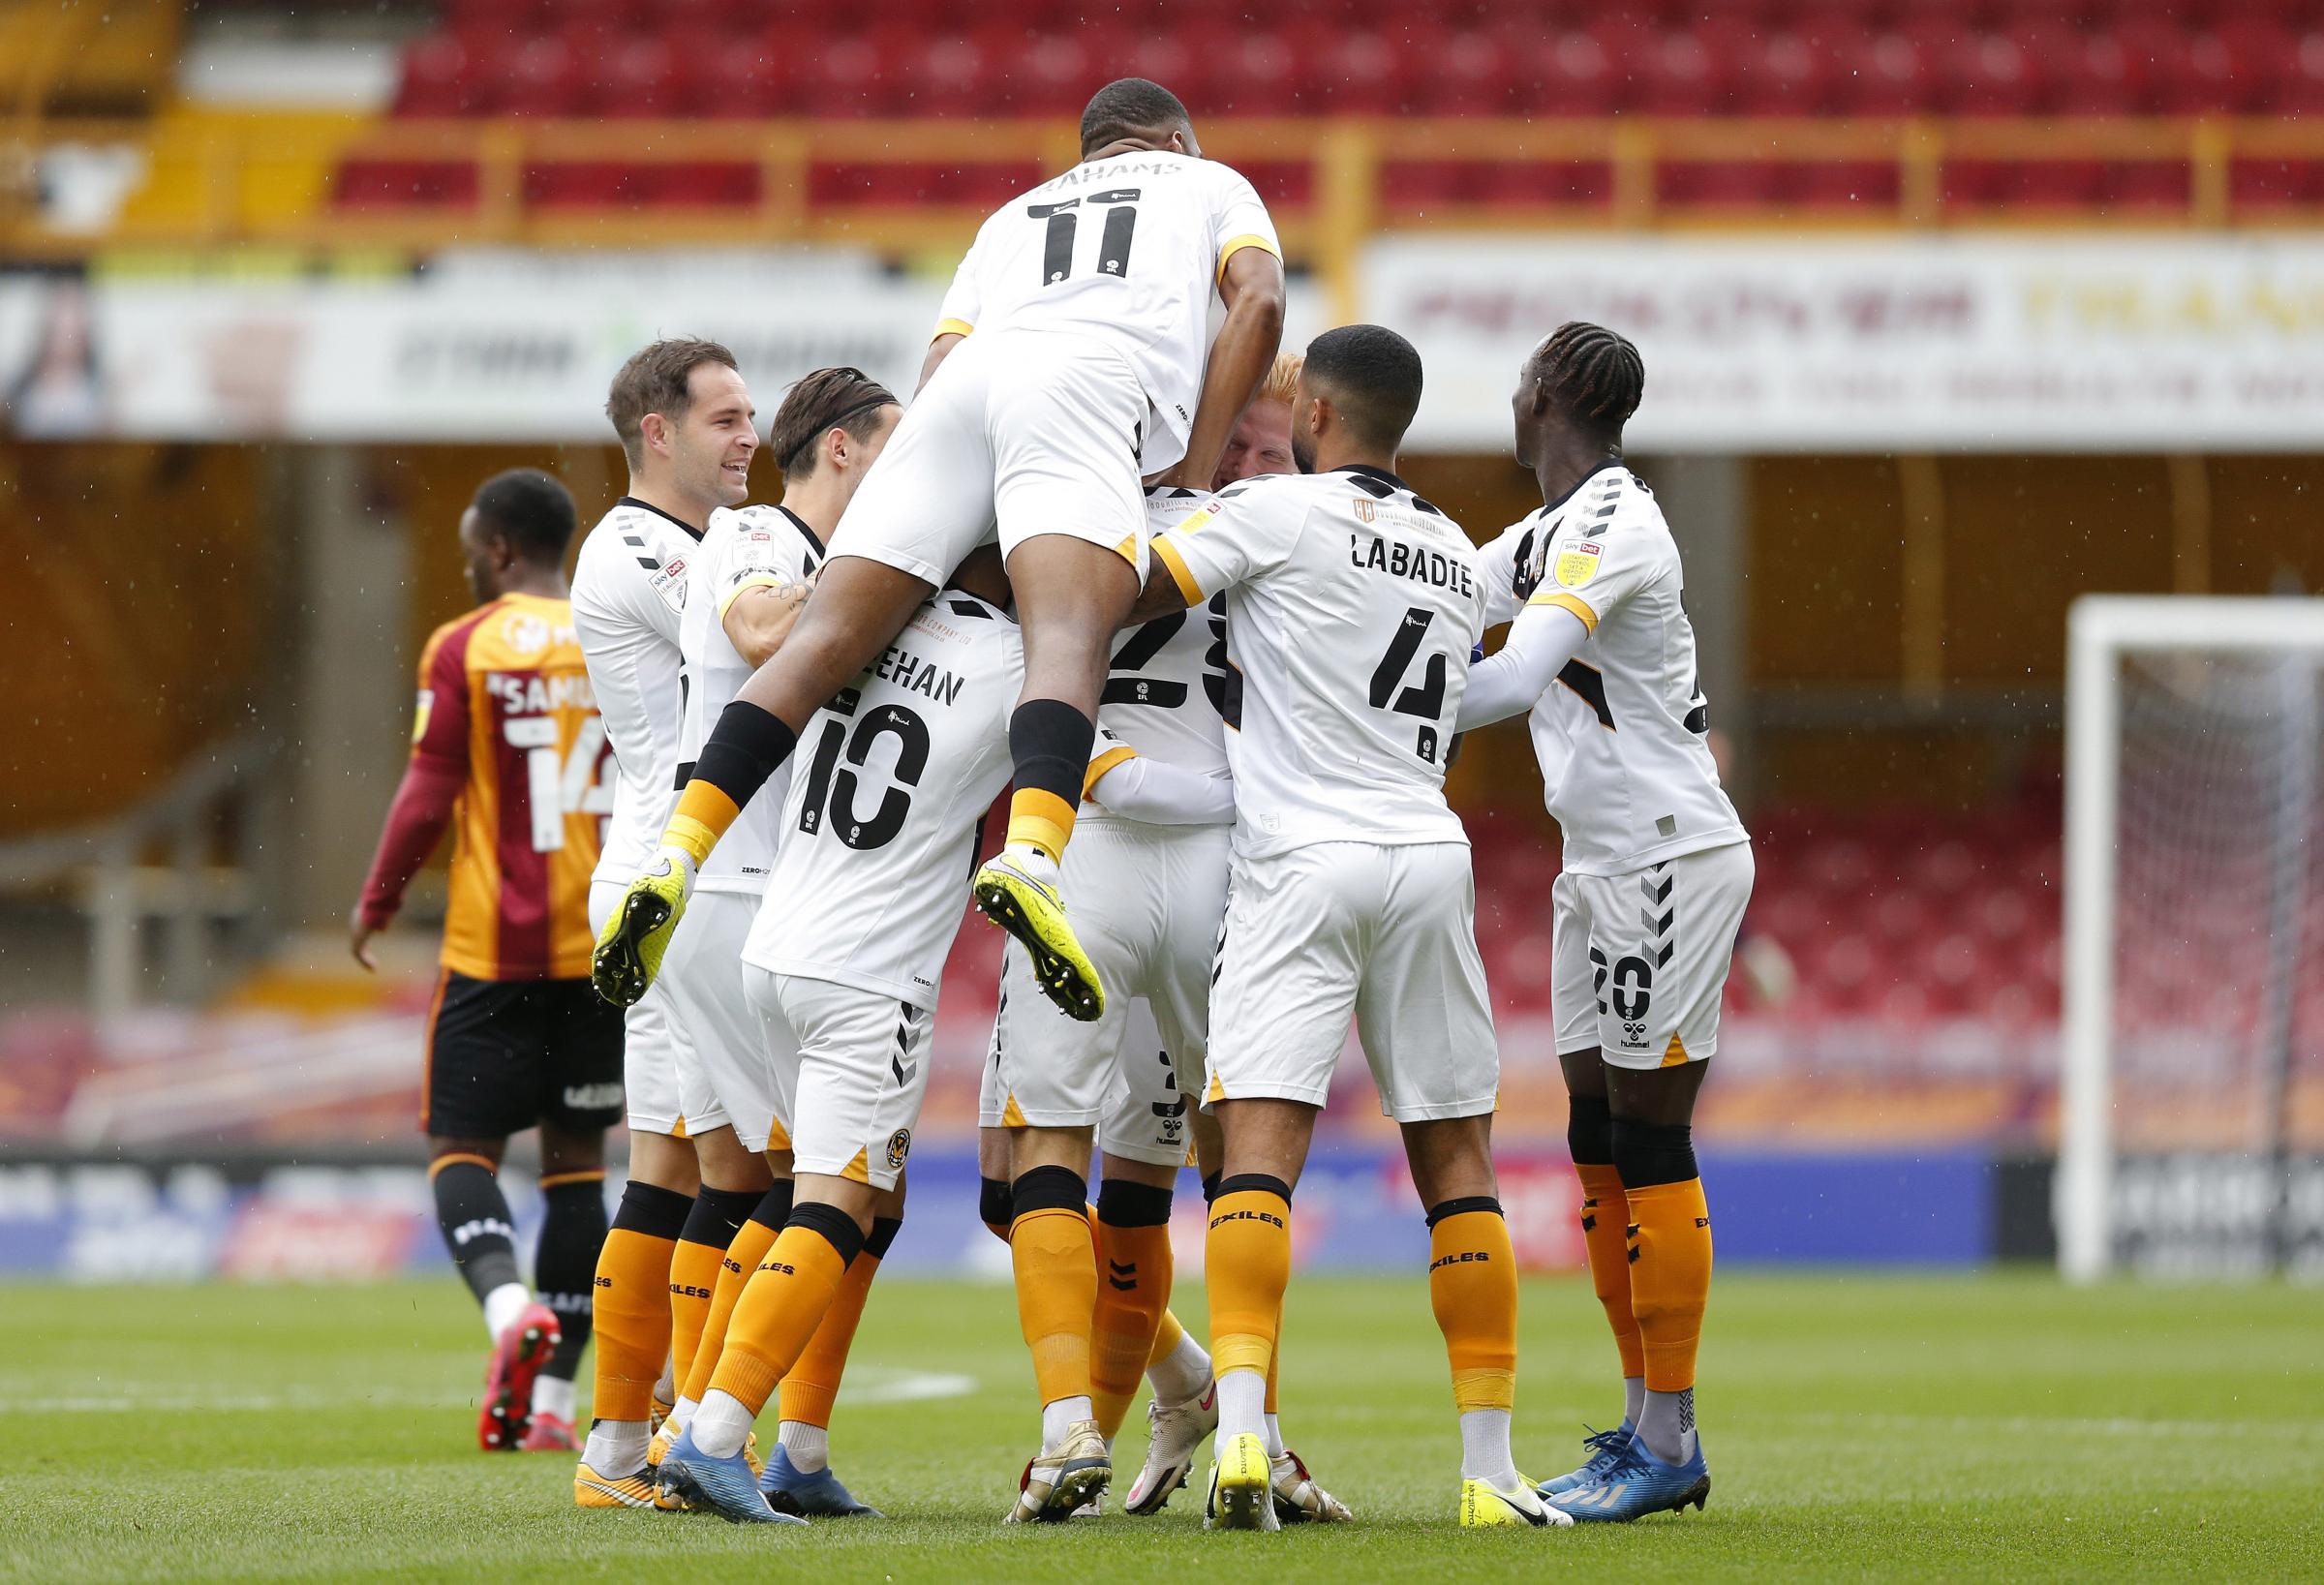 CELEBRATIONS: Newport County AFC went top of the table by thrashing Bradford City when playing superb football